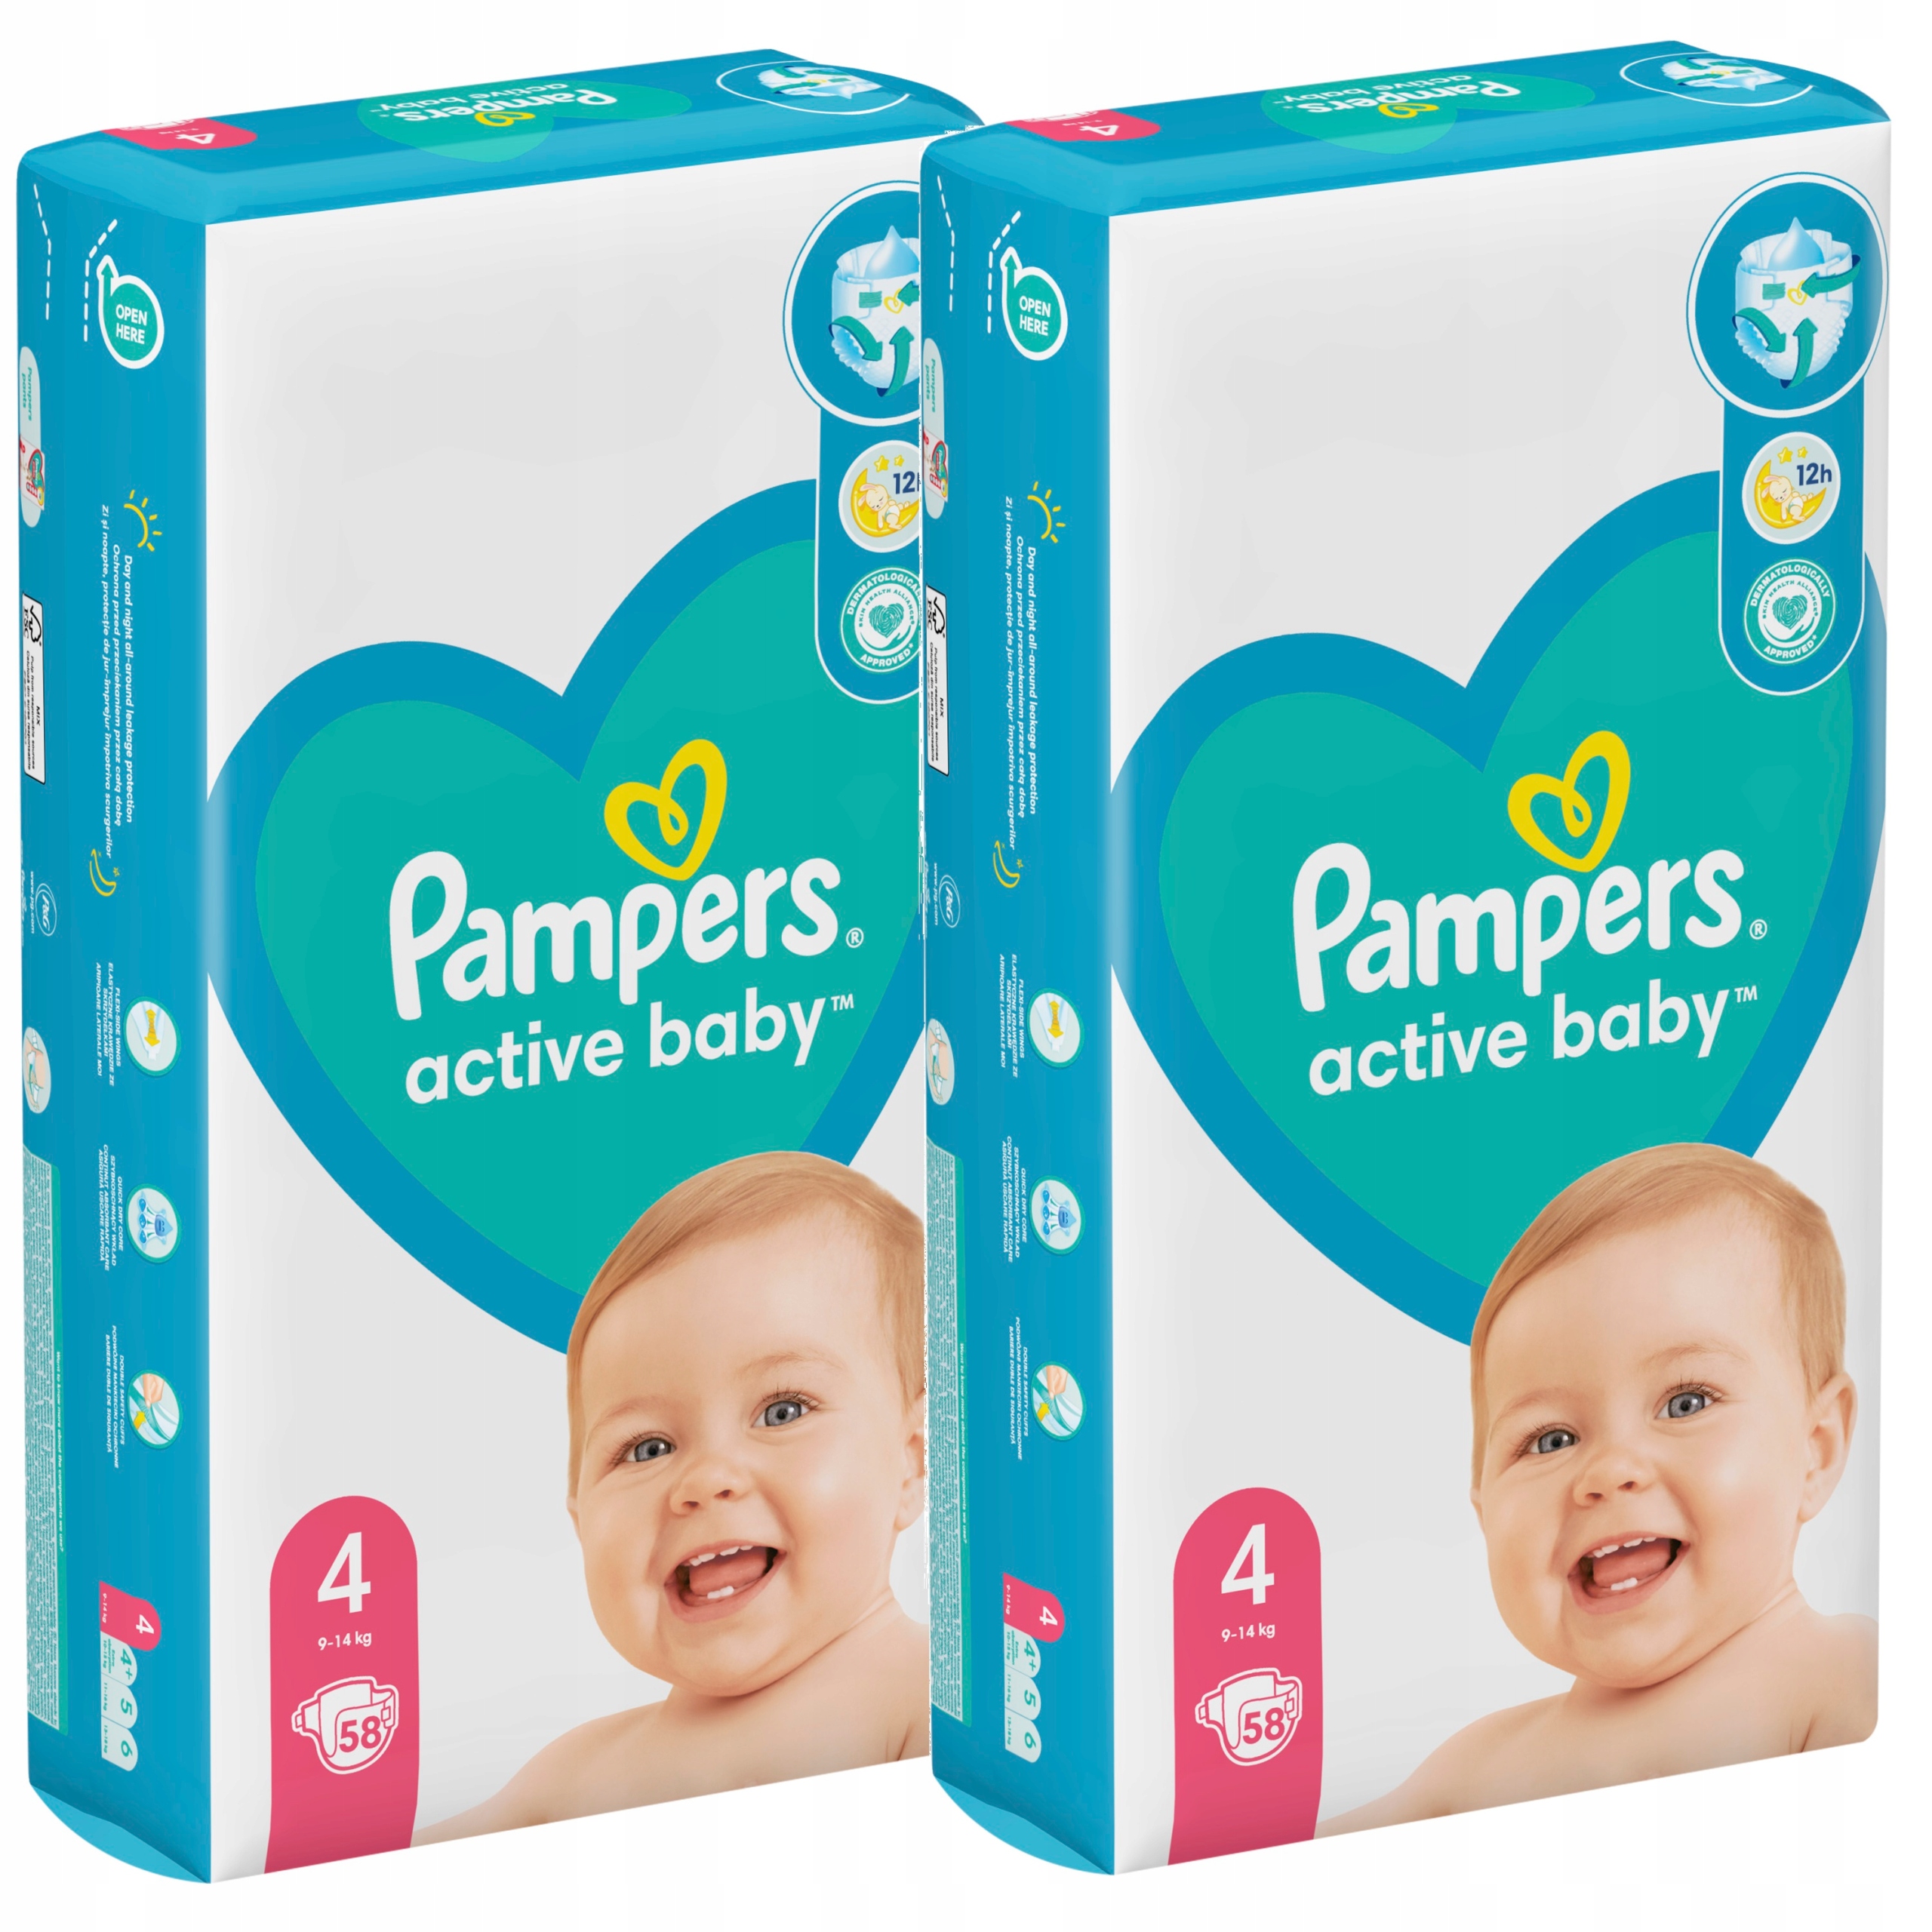 peiluchy pampers